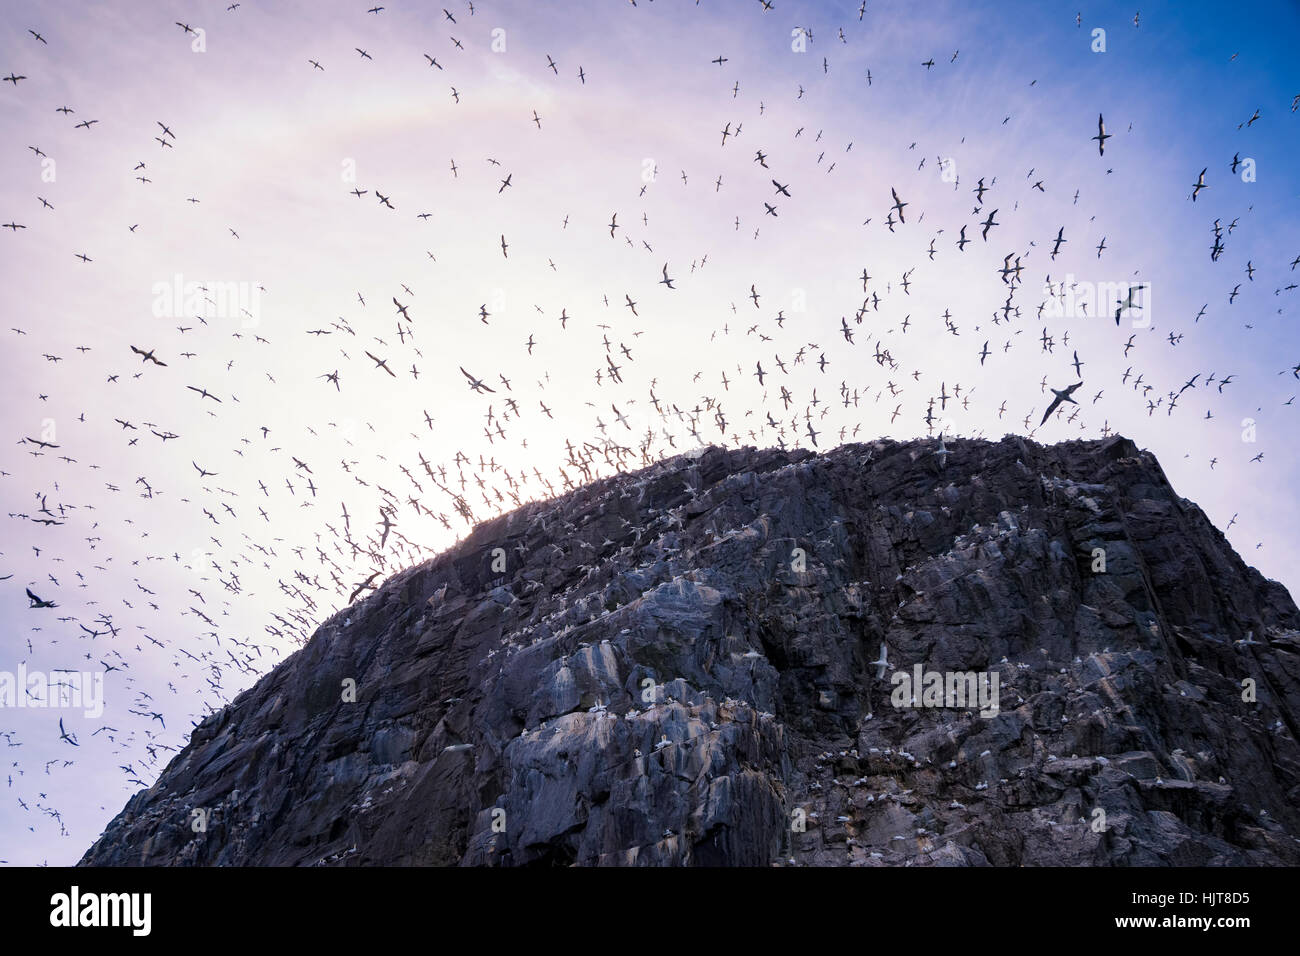 UK, Scotland, East Lothian, Bass Rock with a colony of Northern Gannets Stock Photo